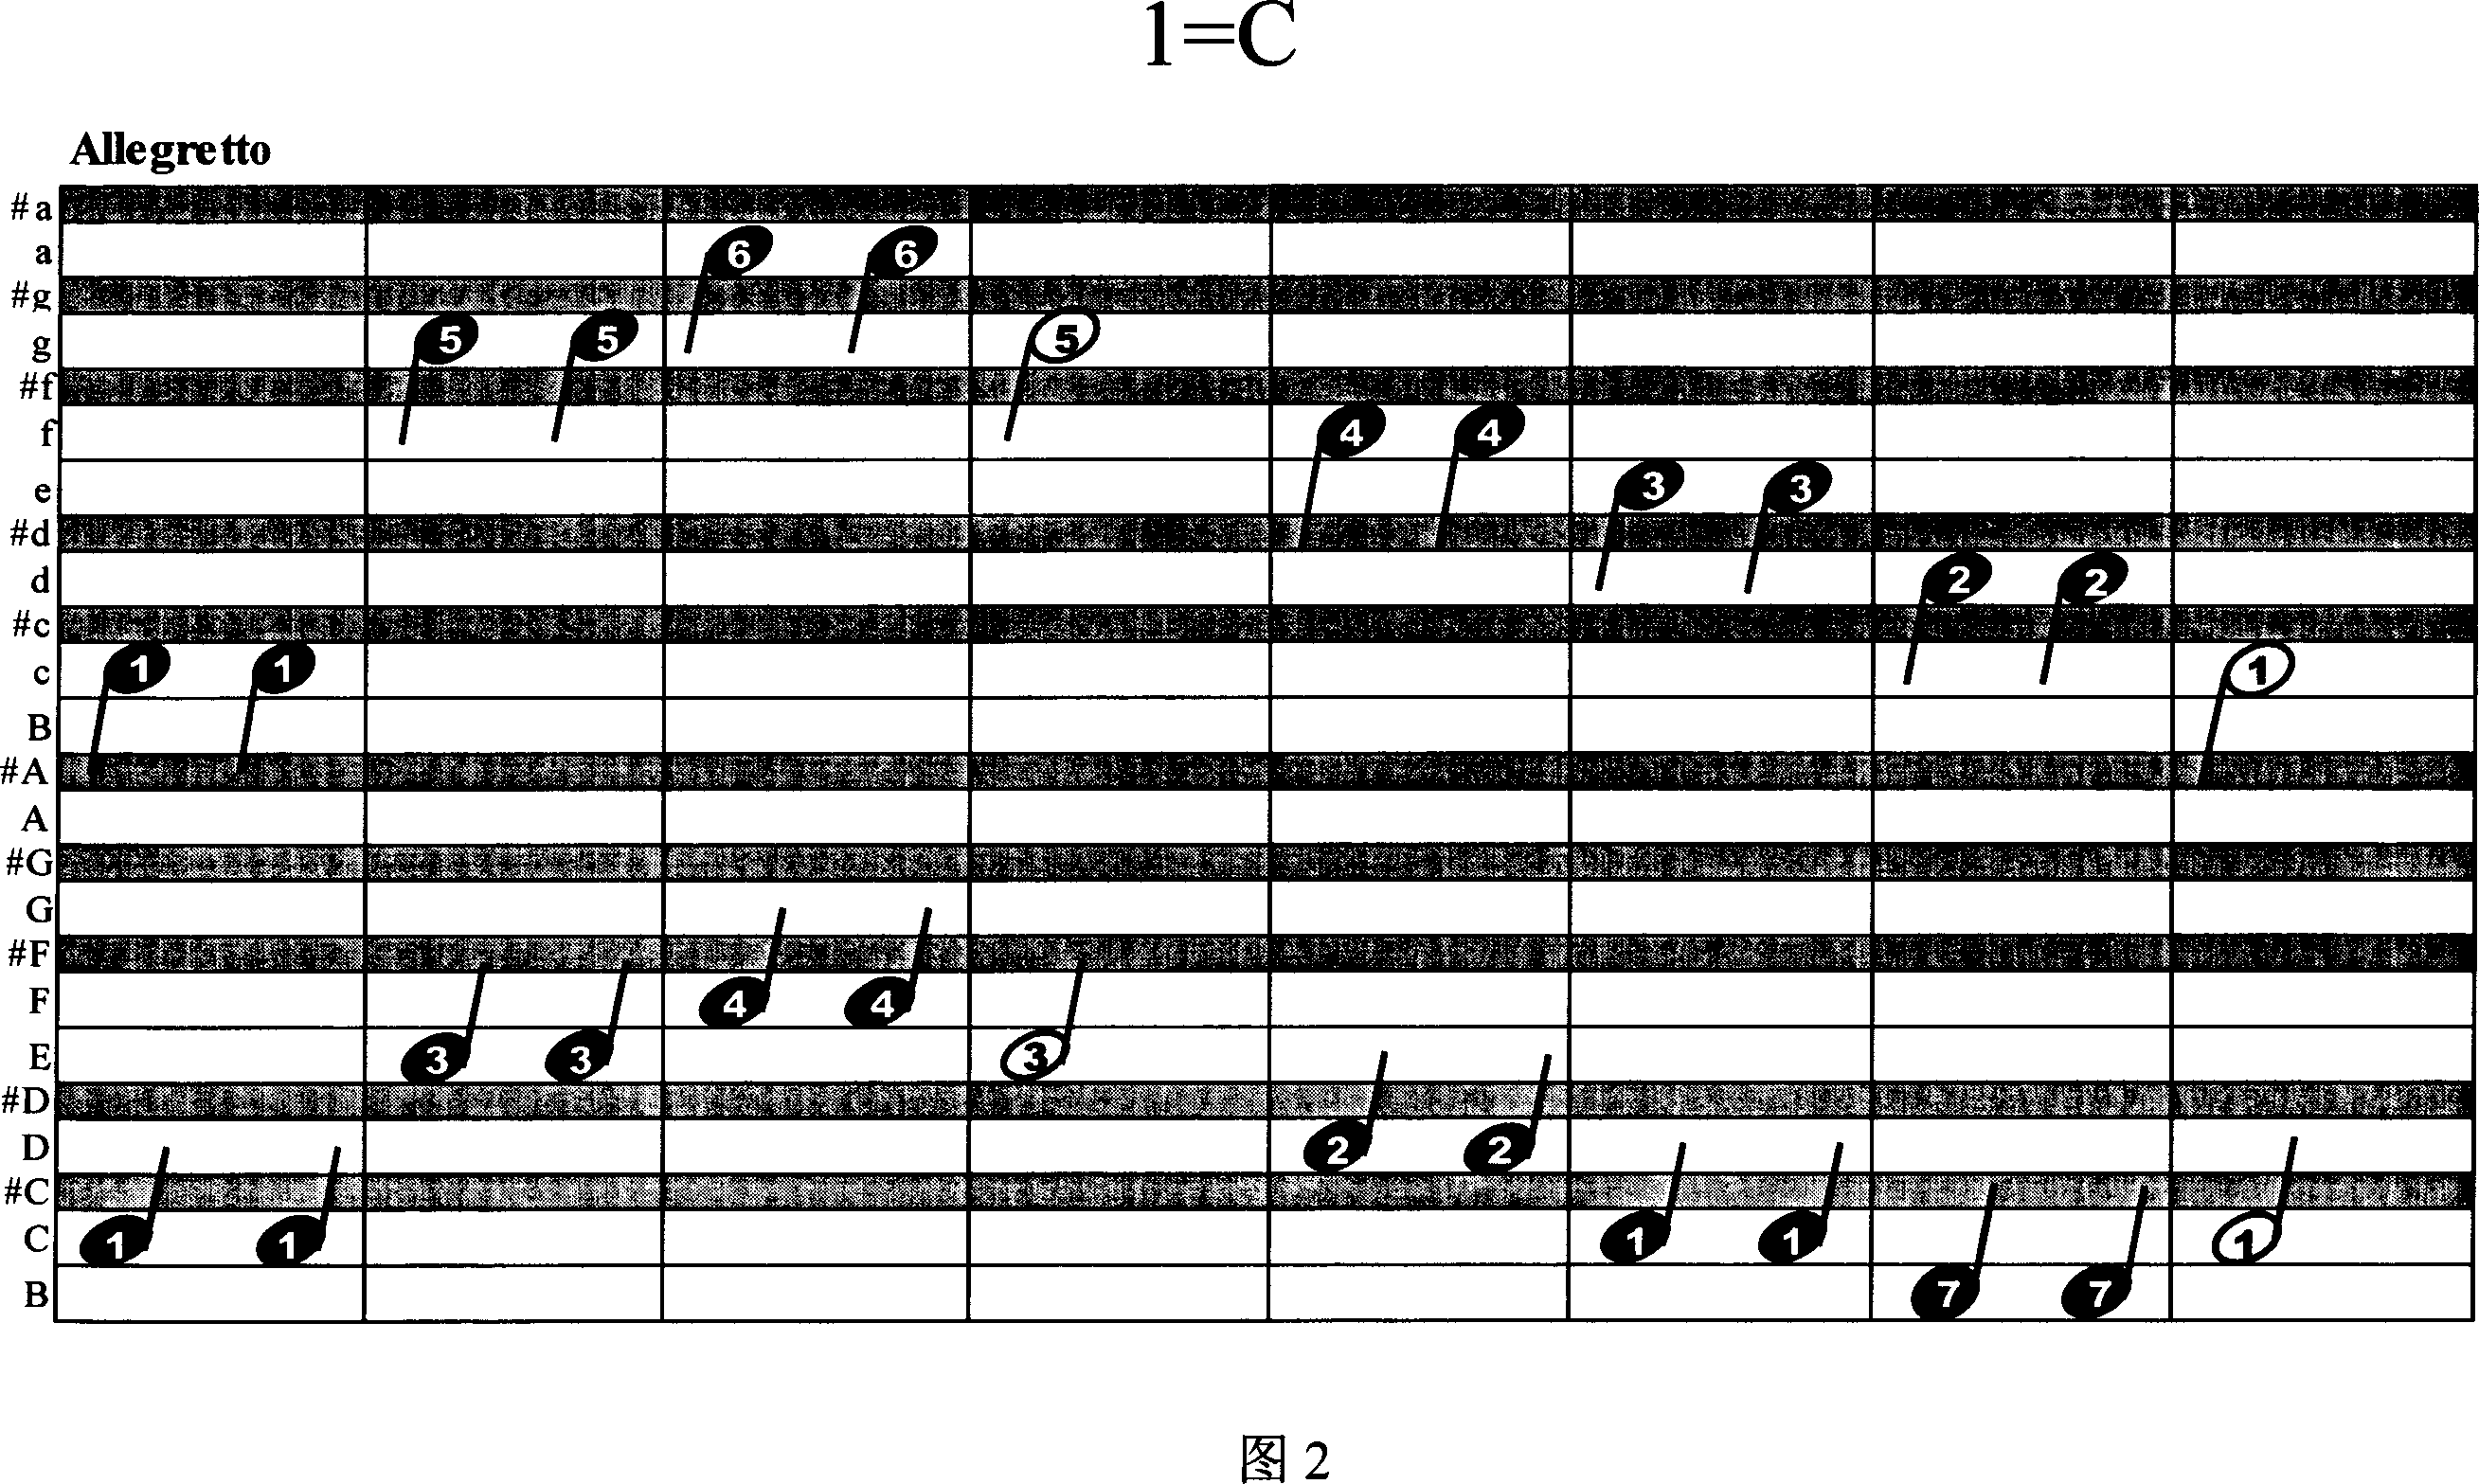 Blank musical notation emerged with staff and numbered notation and corresponding to piano keyboard and musical note form